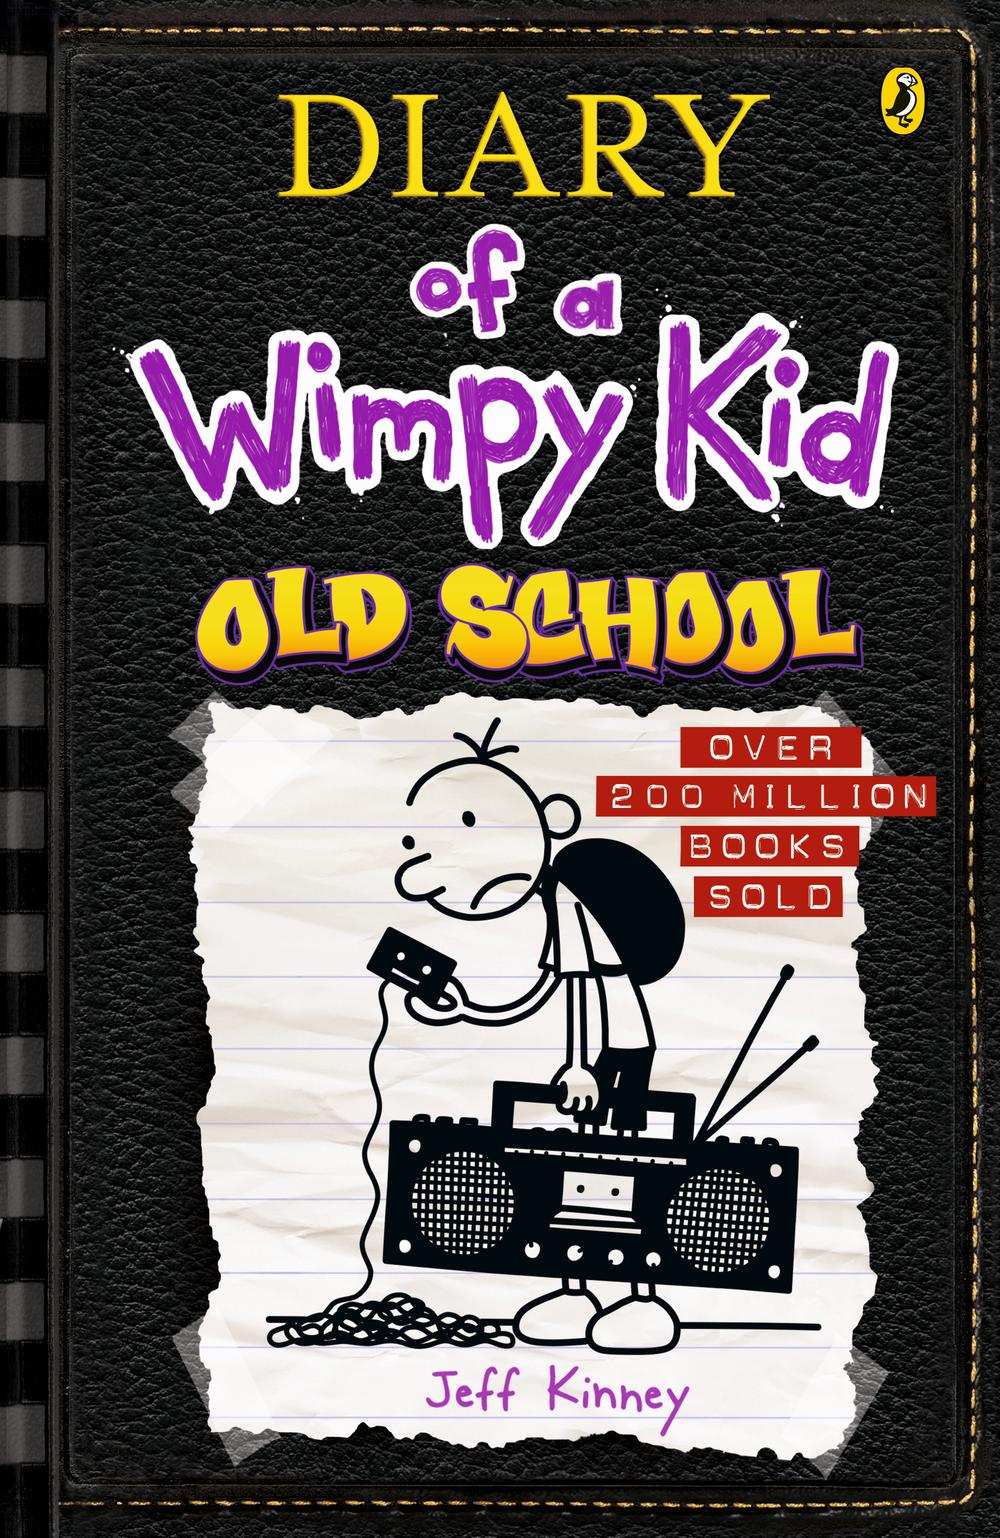 Diary of a Wimpy Kid: Old School (Book 10) by Jeff Kinney, Paperback ...